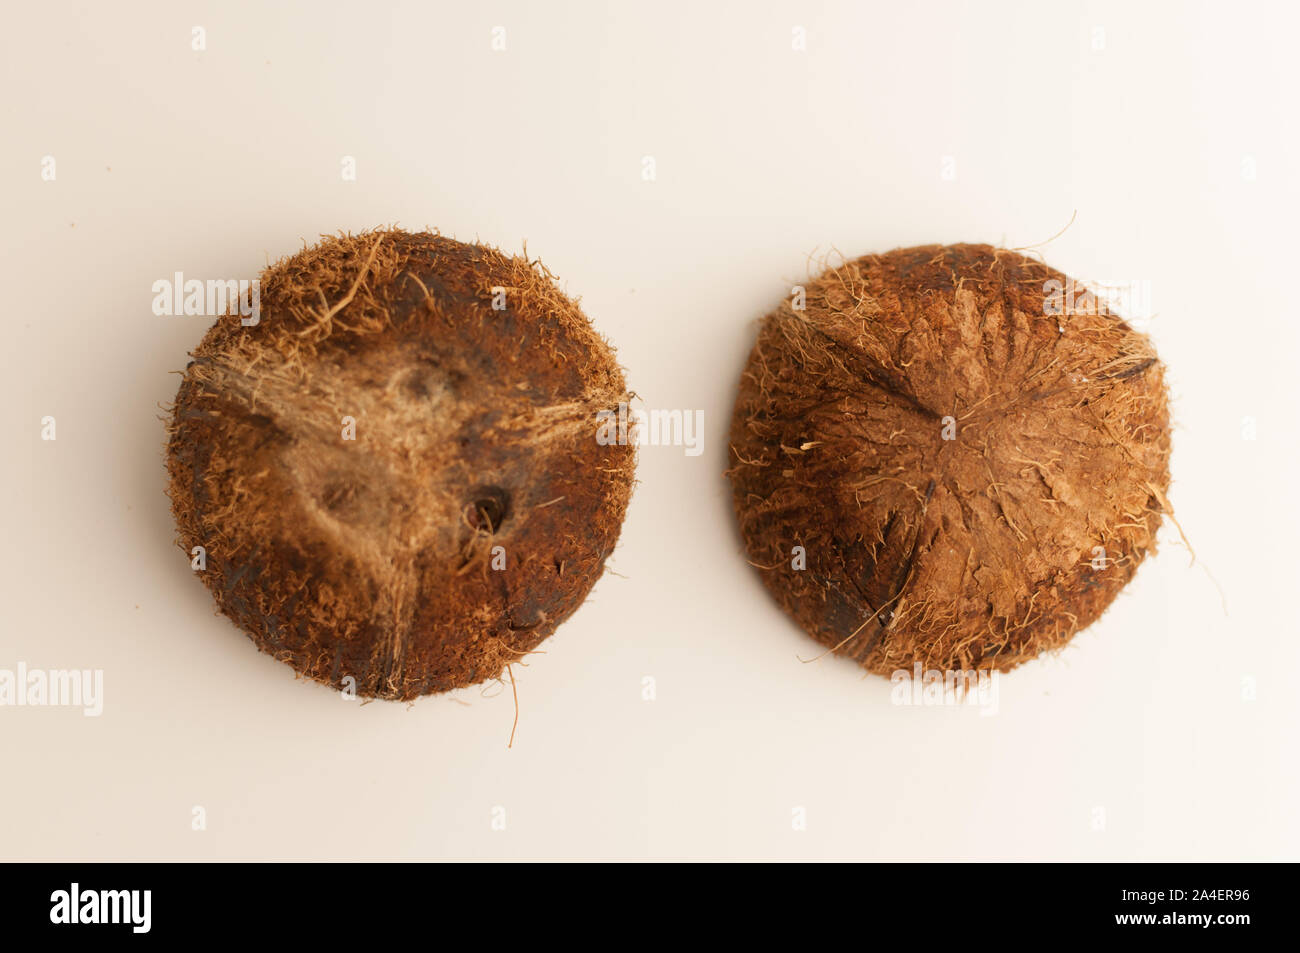 two halves of coconut shell on a white background, isolate. Future food bowls zero waste. Environmentally friendly material for dishes. Copy space. Stock Photo